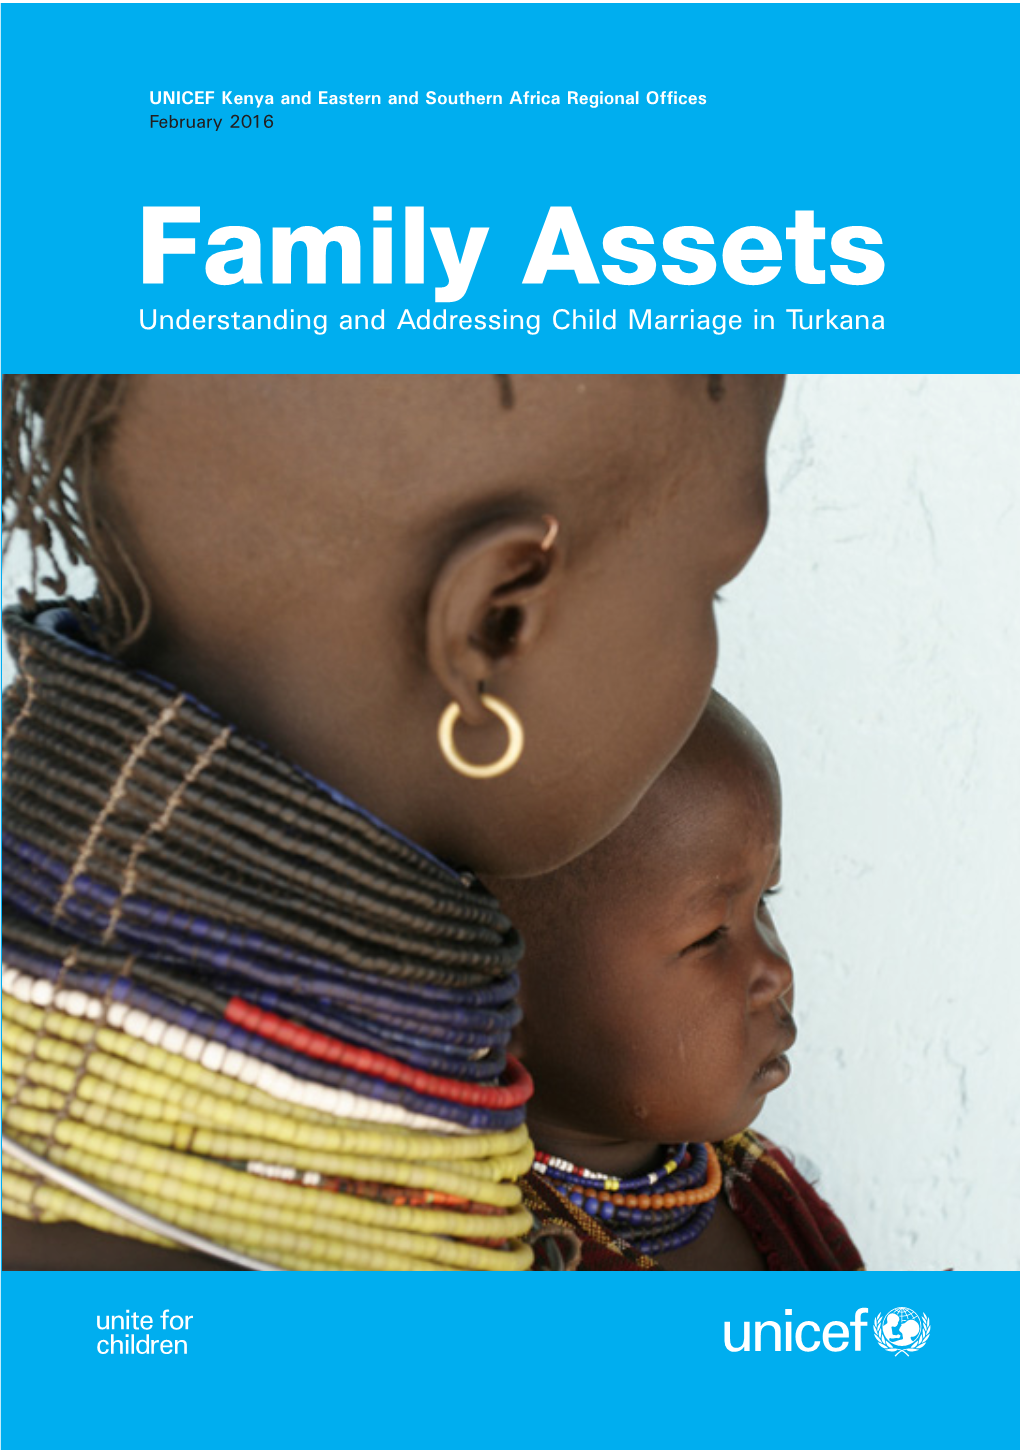 FAMILY ASSETS: Understanding and Addressing Child Marriage in Turkana ©United Nations Children’S Fund (UNICEF), Nairobi, 2016